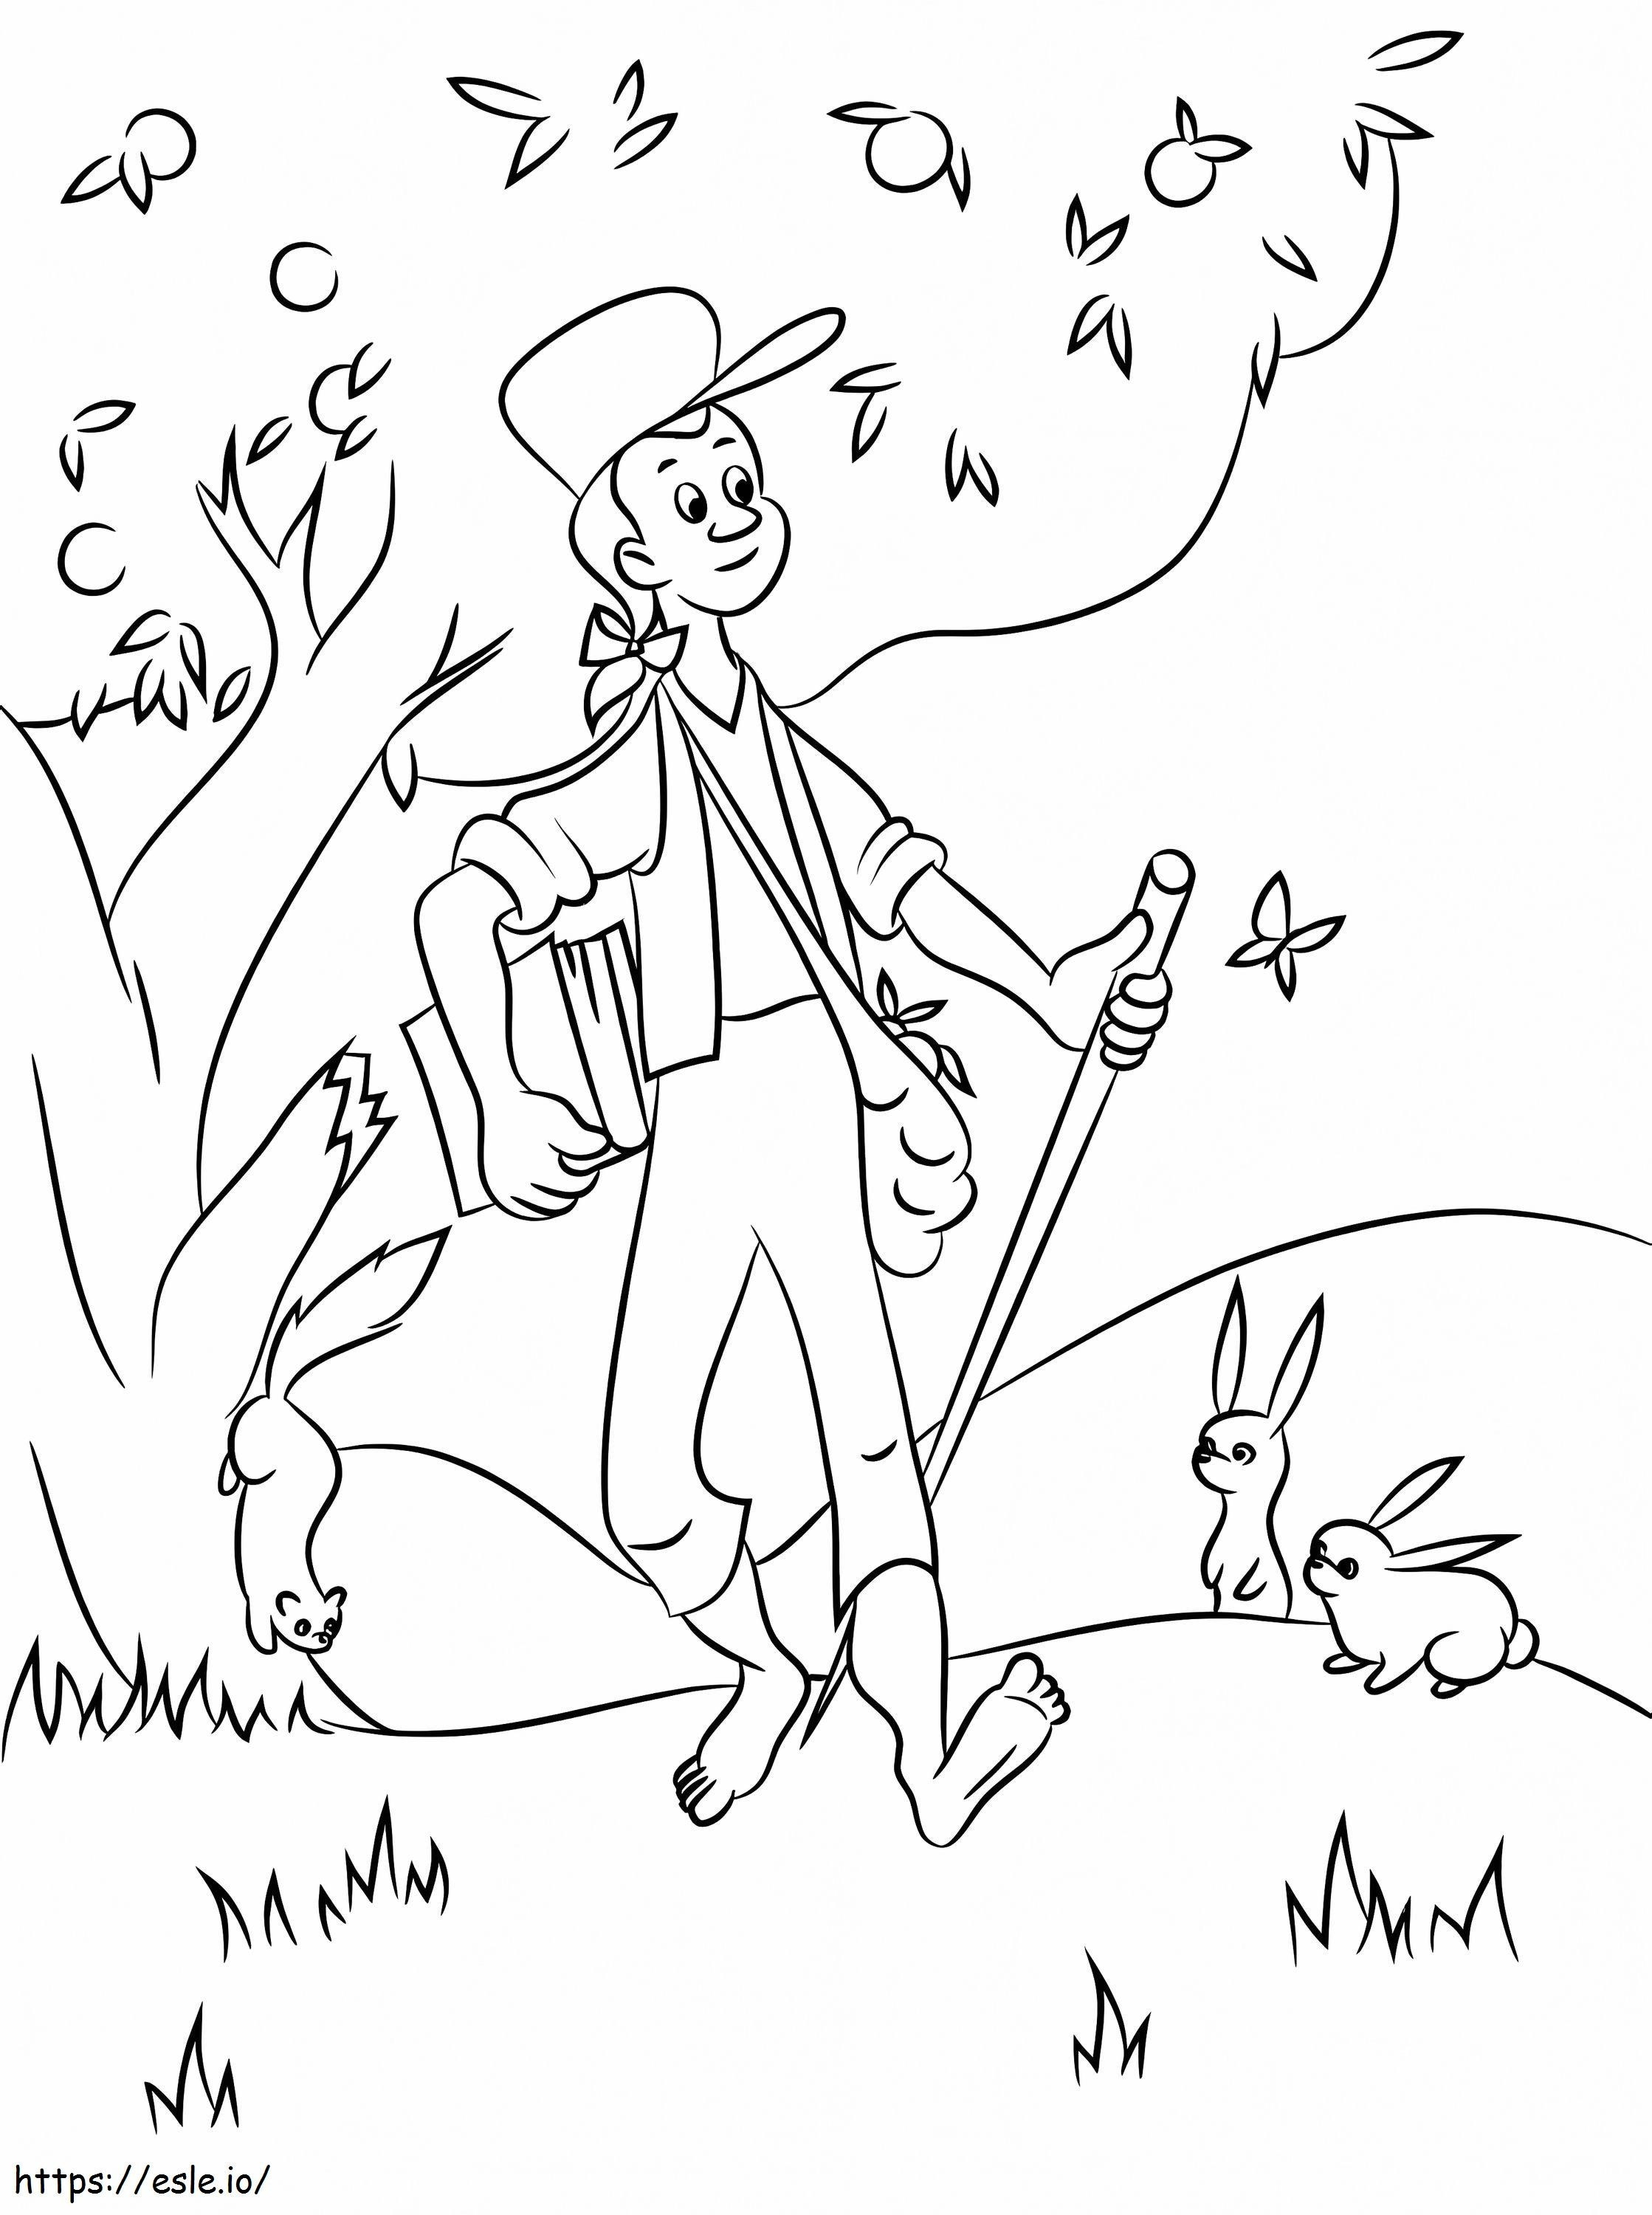 Printable Johnny Appleseed coloring page